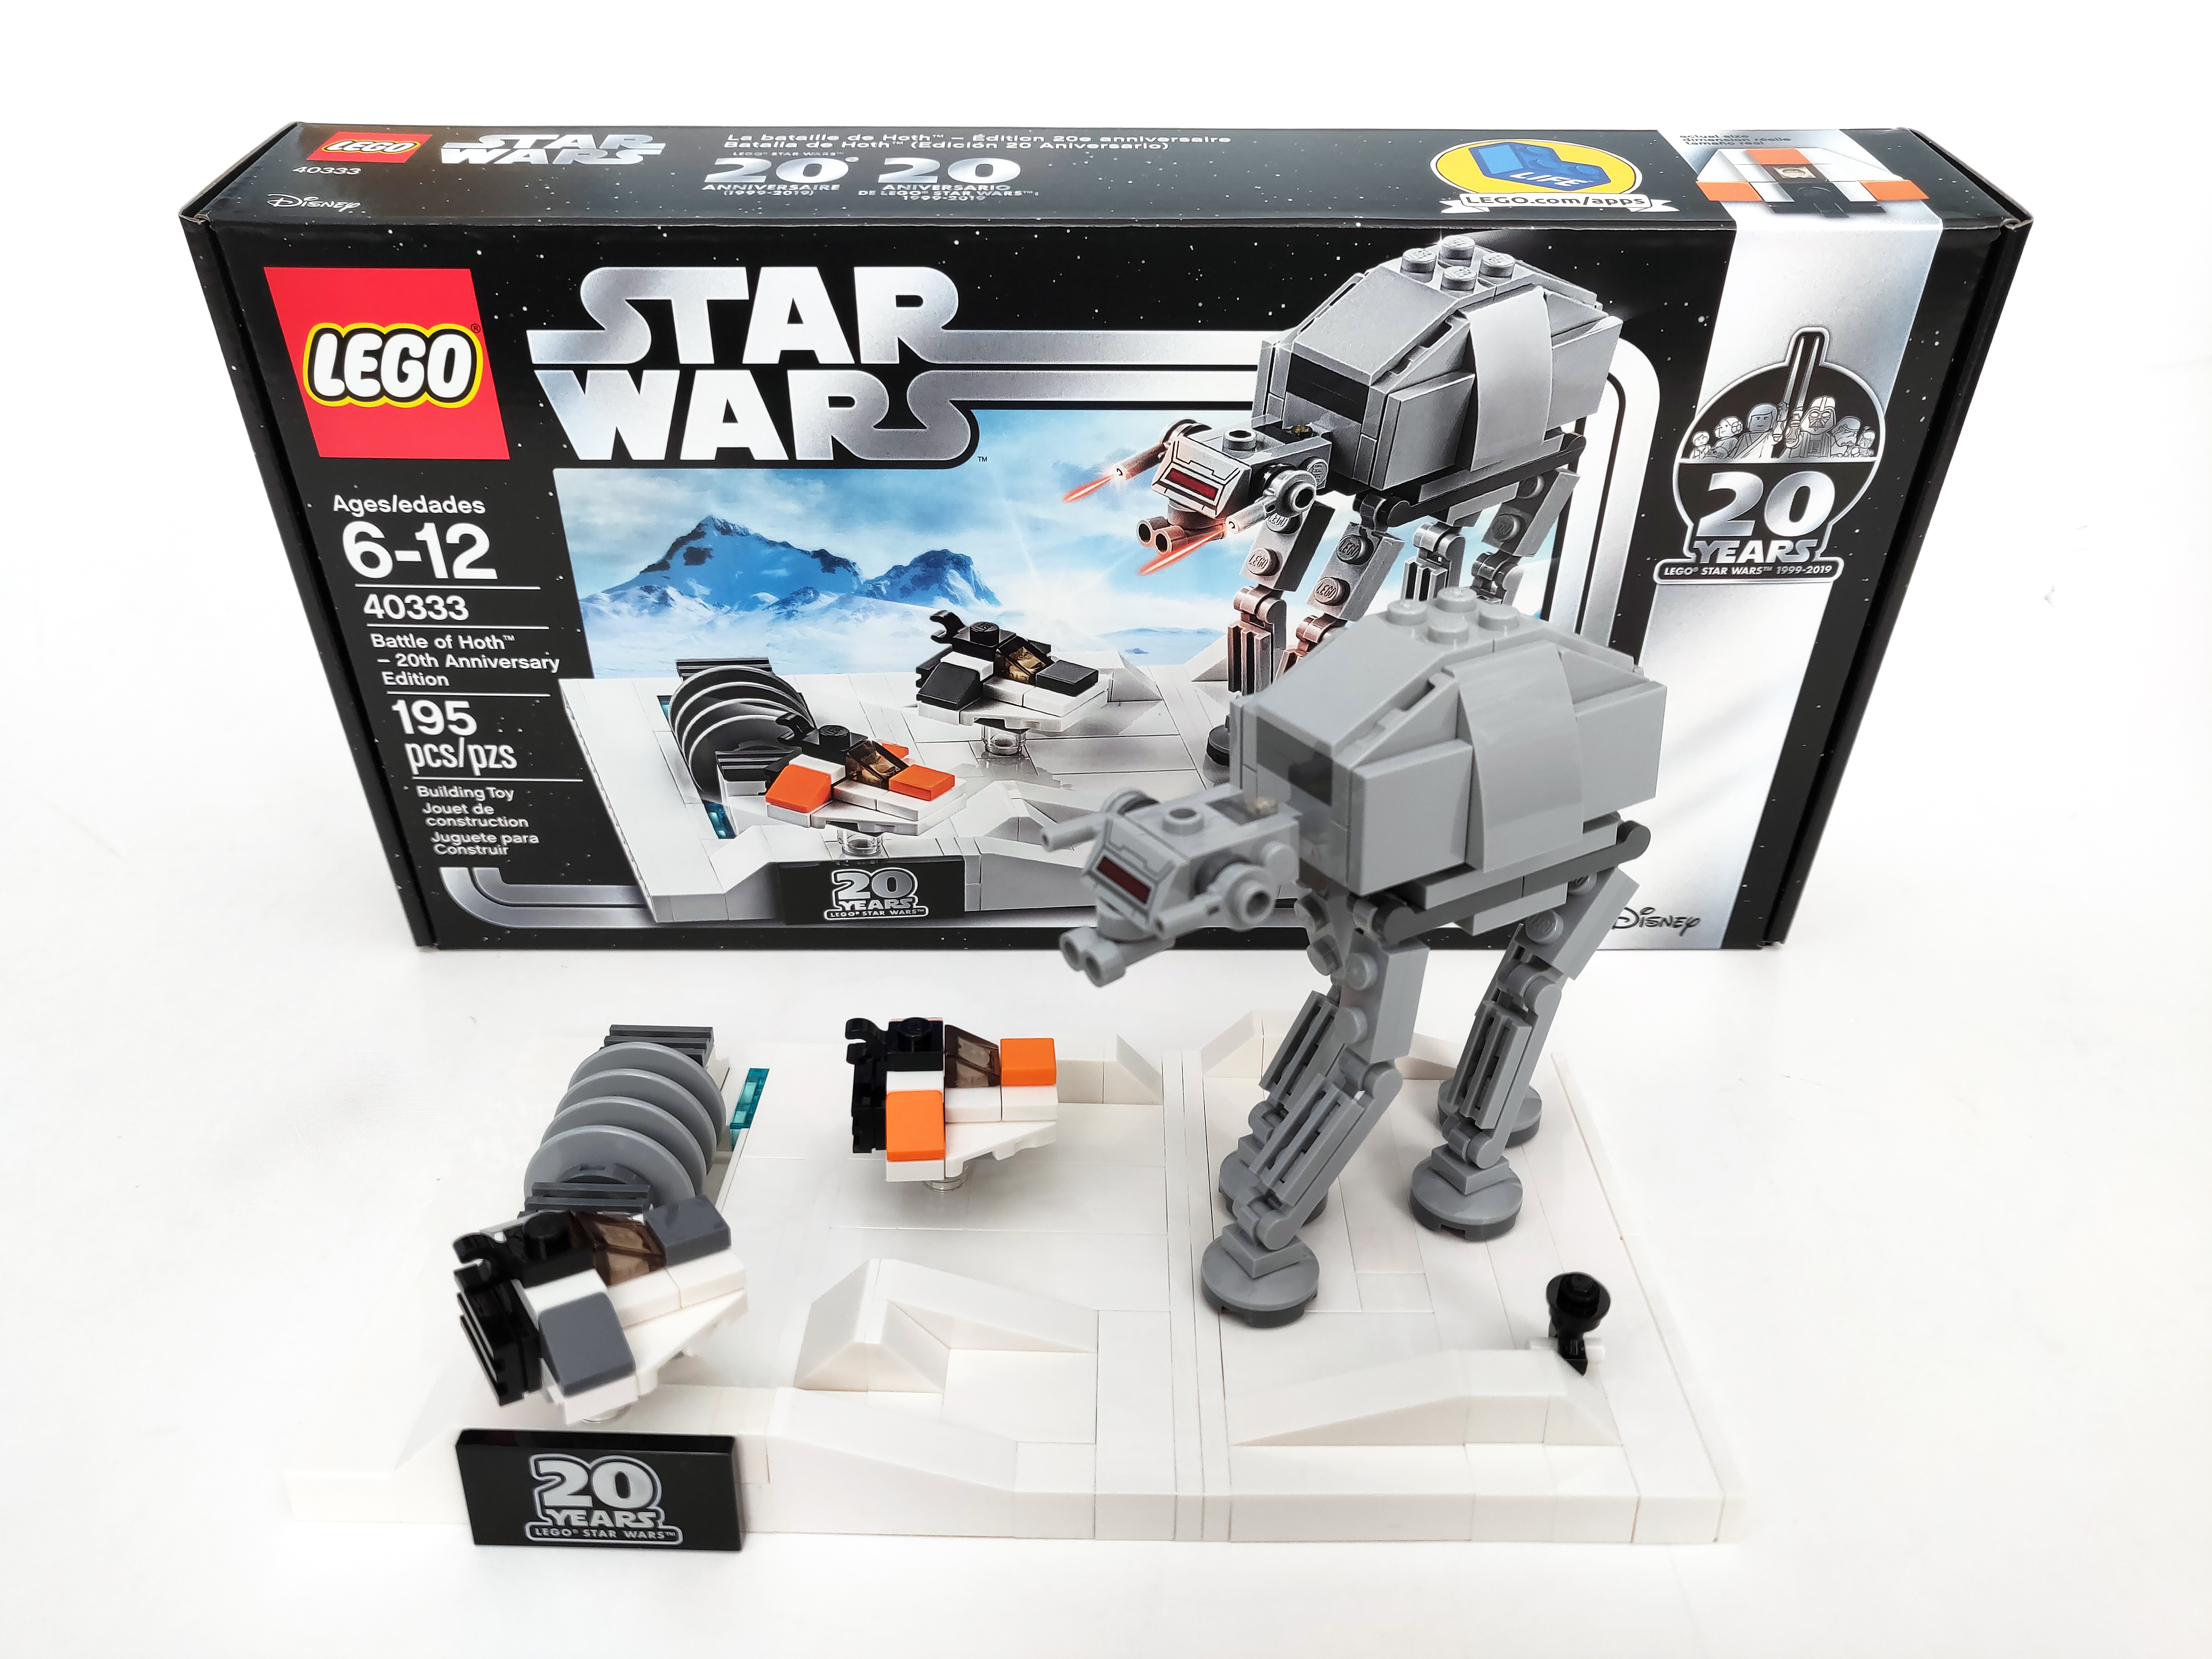 LEGO Star Wars Battle of Hoth - 20th Anniversary Edition Review - The Brick Fan